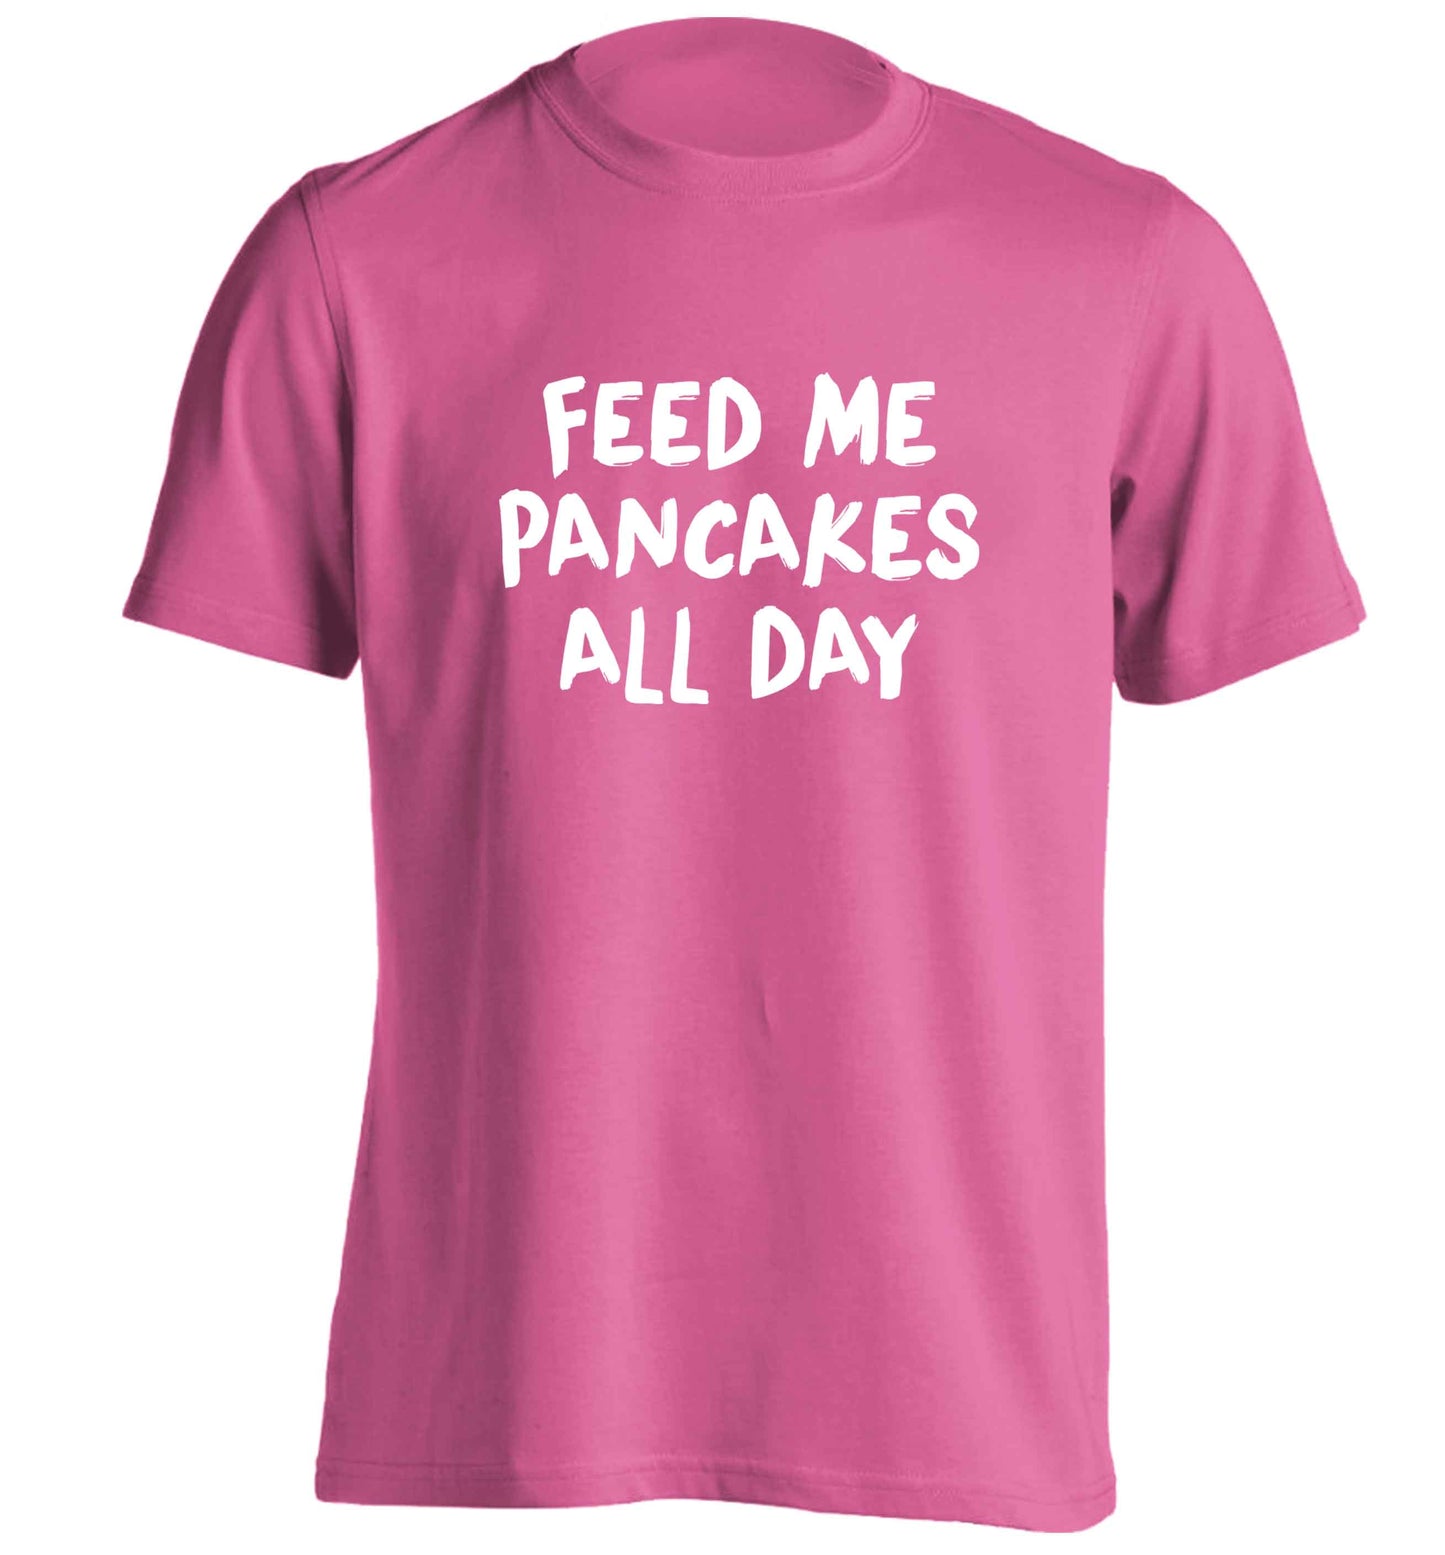 Feed me pancakes all day adults unisex pink Tshirt 2XL